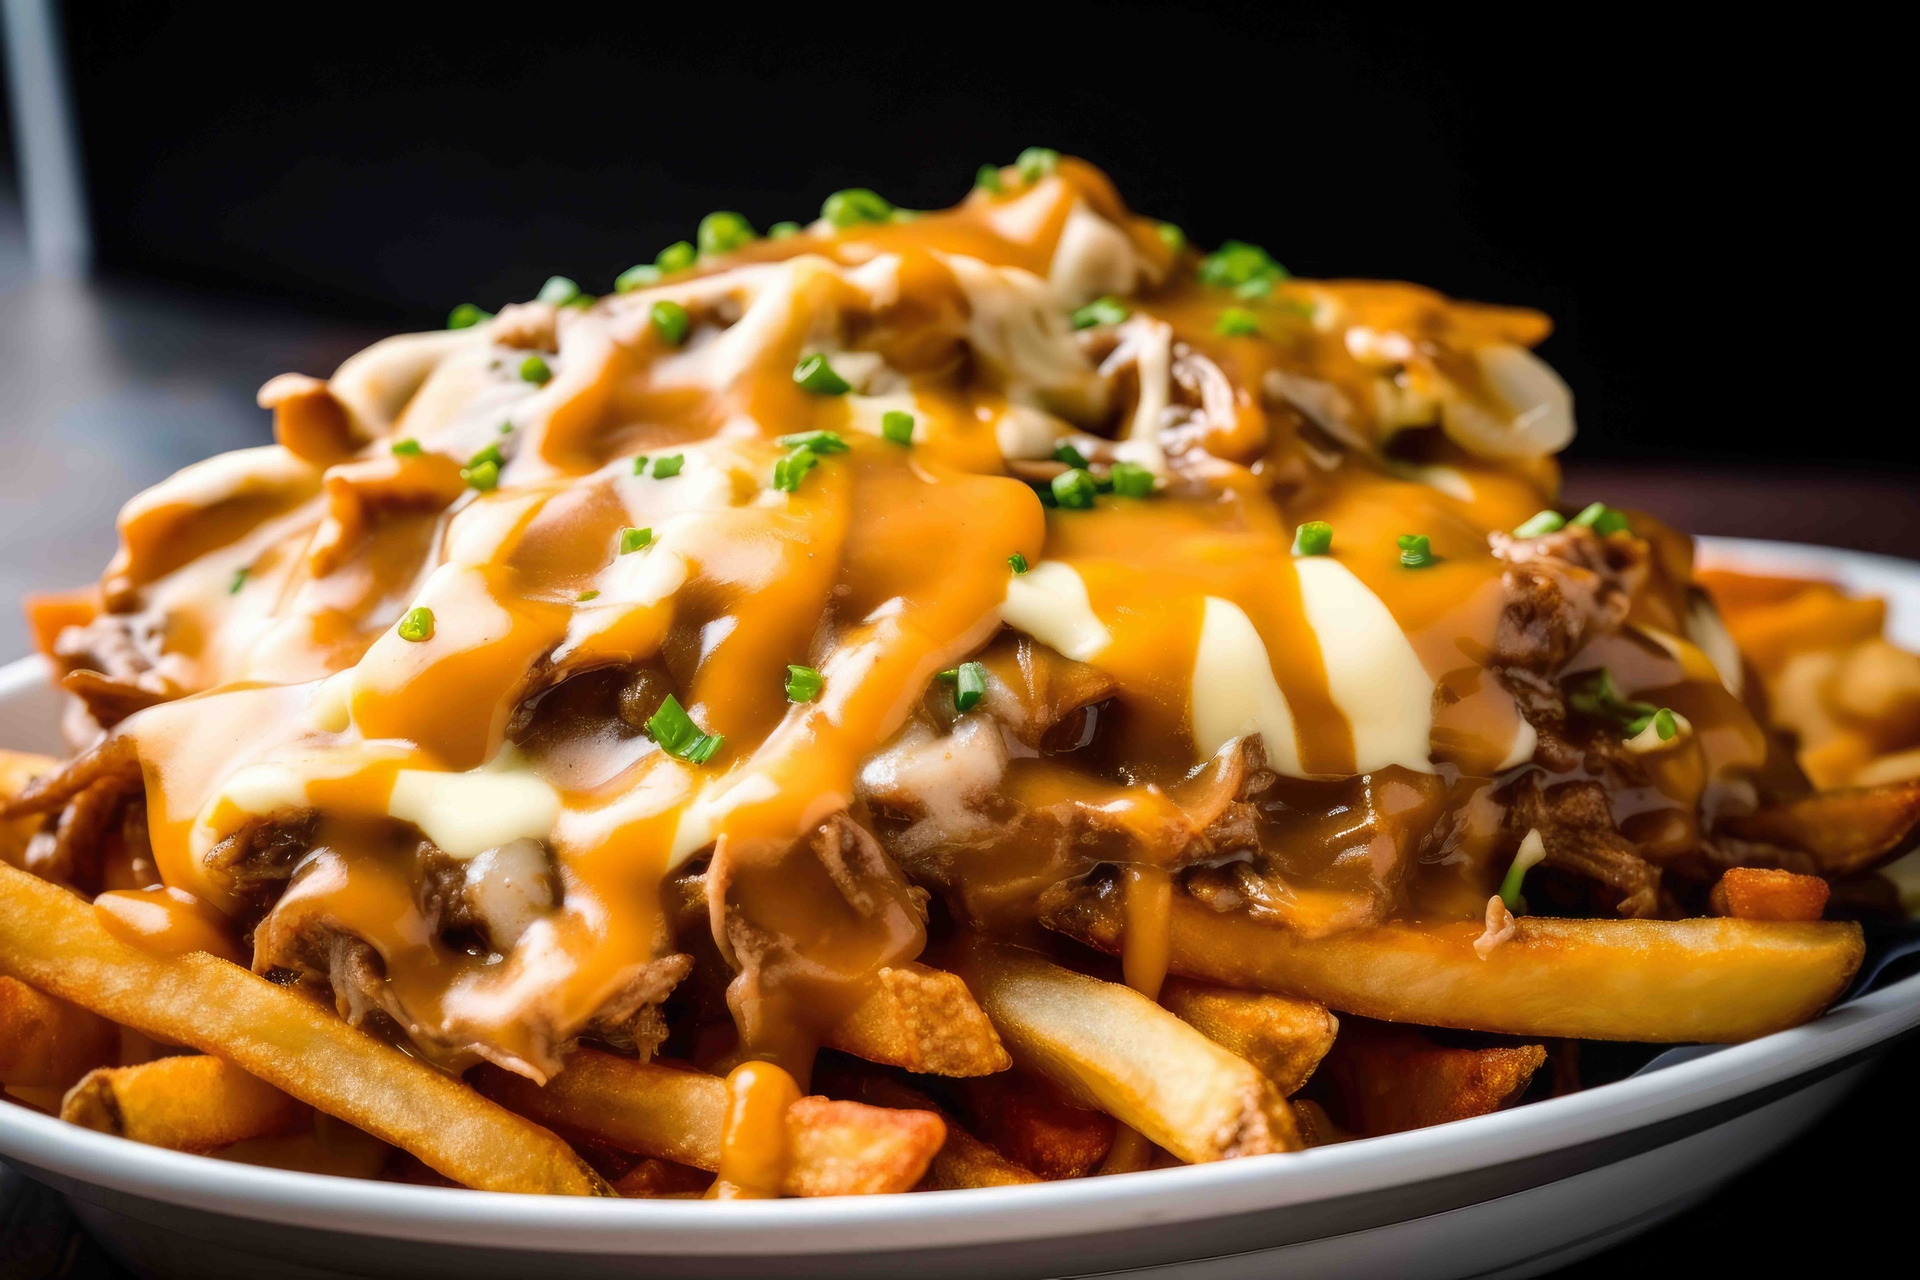 mastering_loaded_fries_in_line_image.